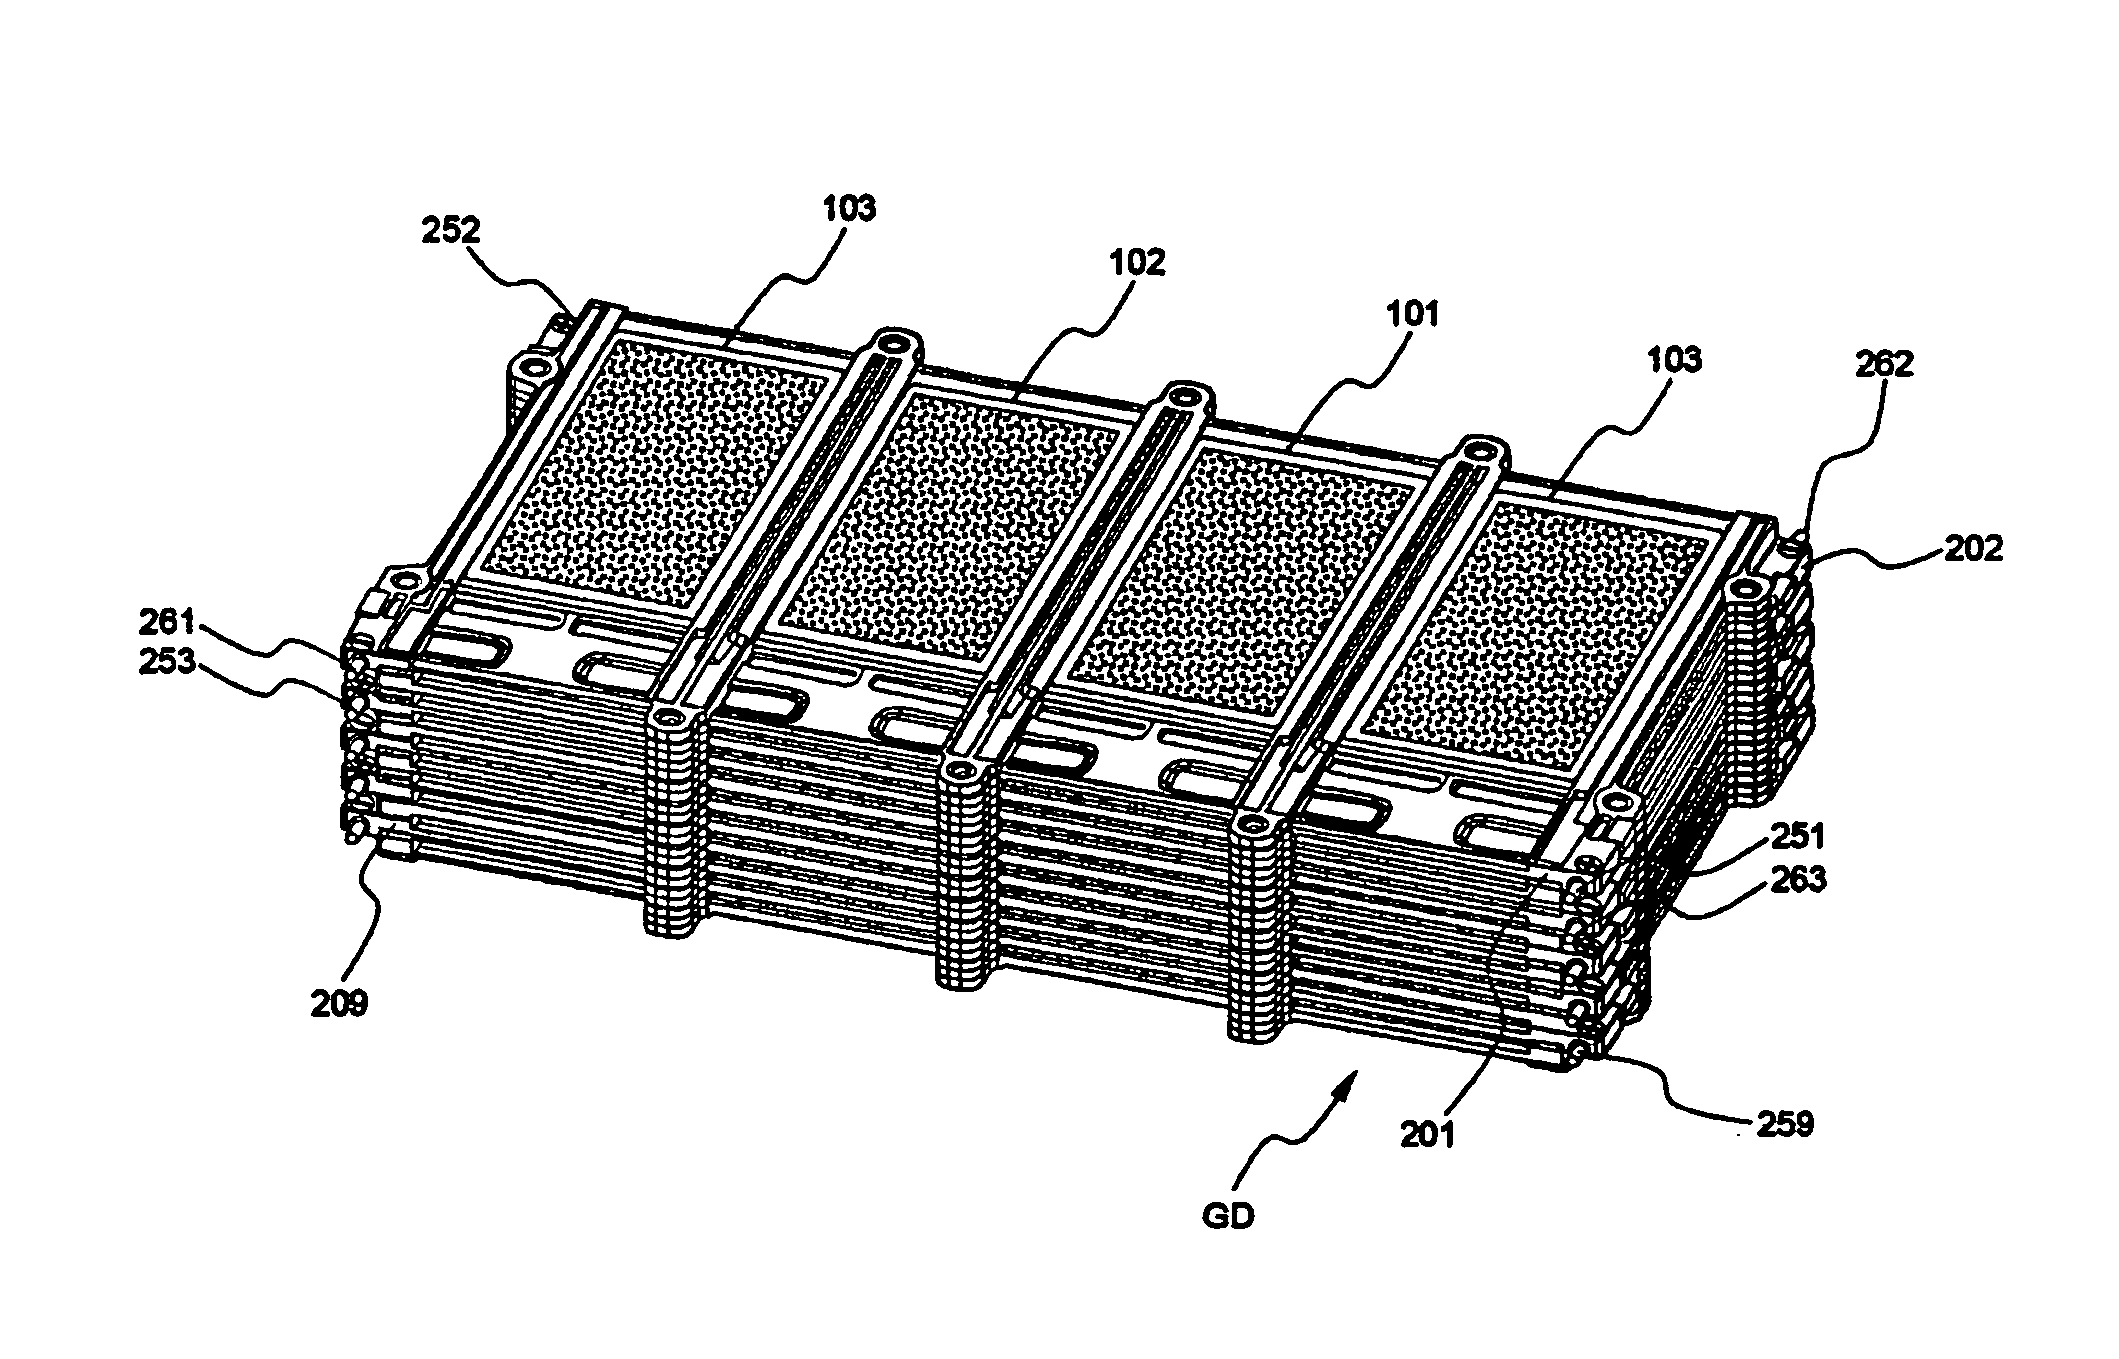 Battery pack comprising combined temperature-controlling system